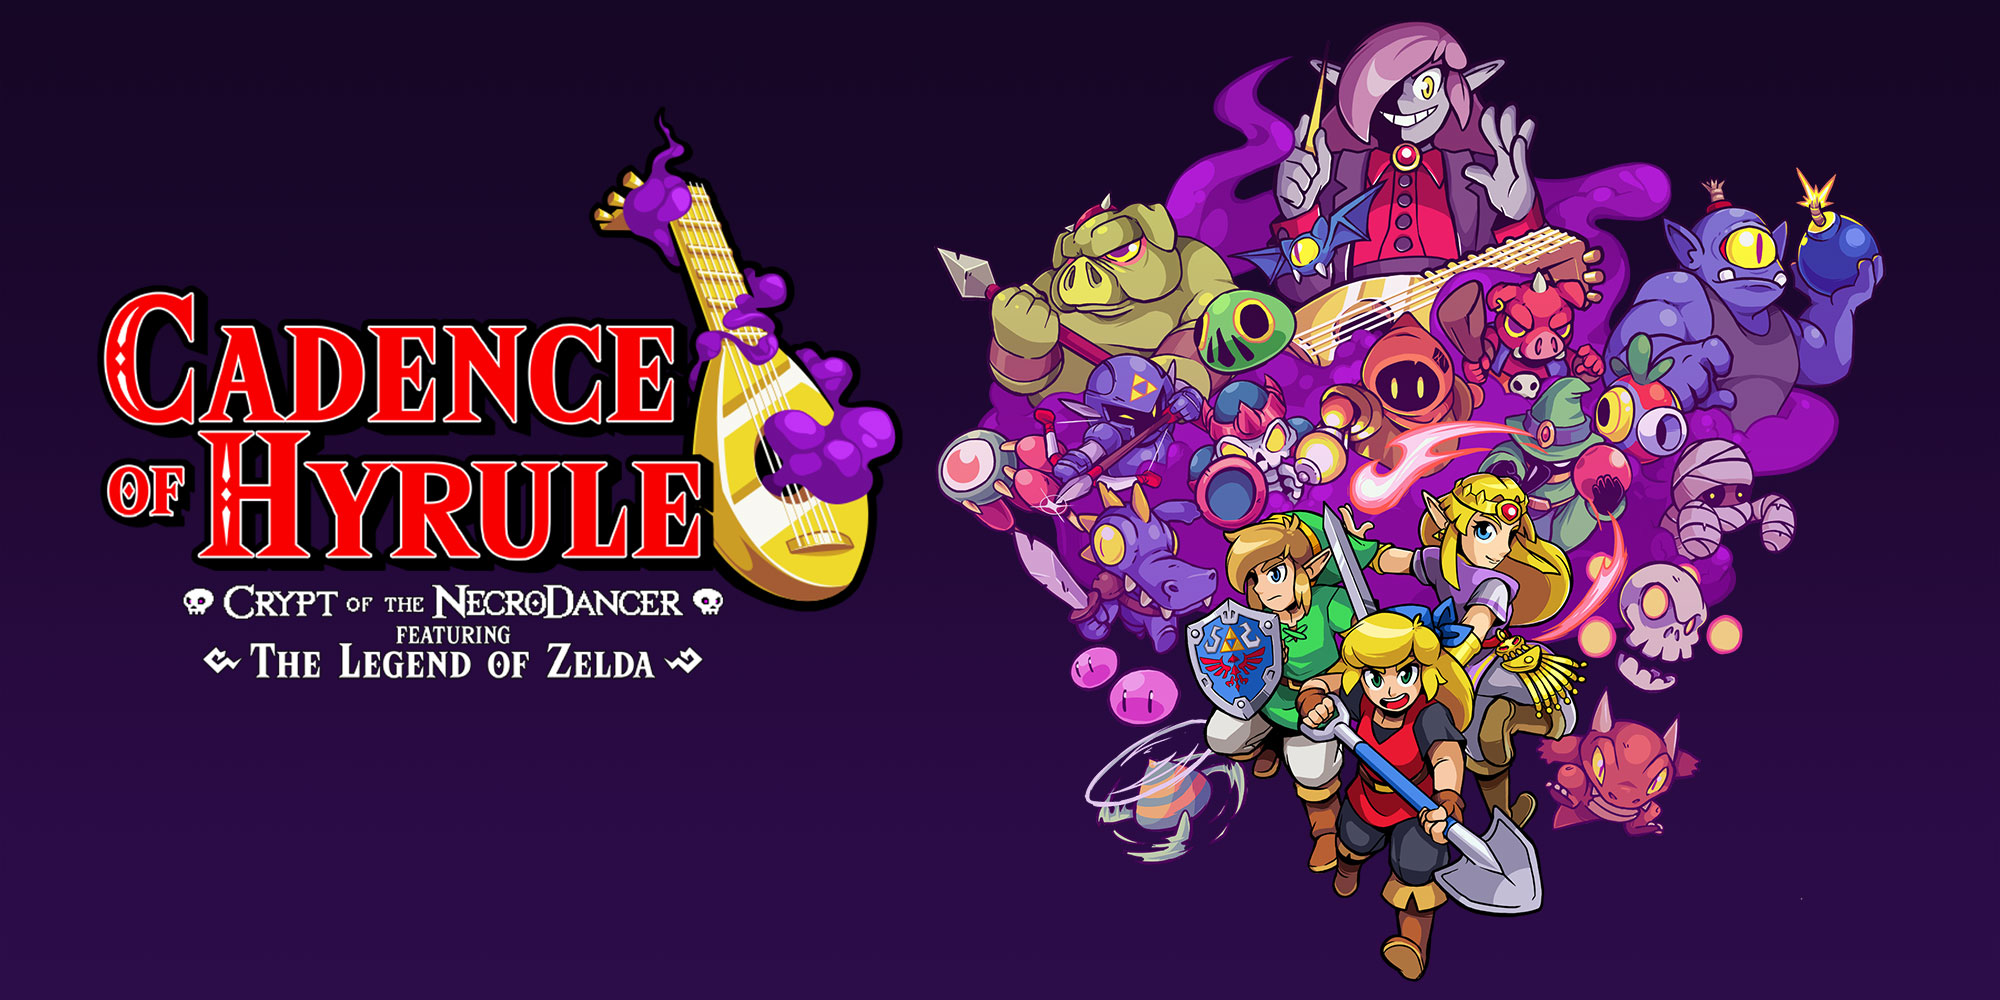 Cadence Of Hyrule Crypt Of The Necrodancer Featuring The Legend Of Zelda Nintendo Switch Download Software Games Nintendo